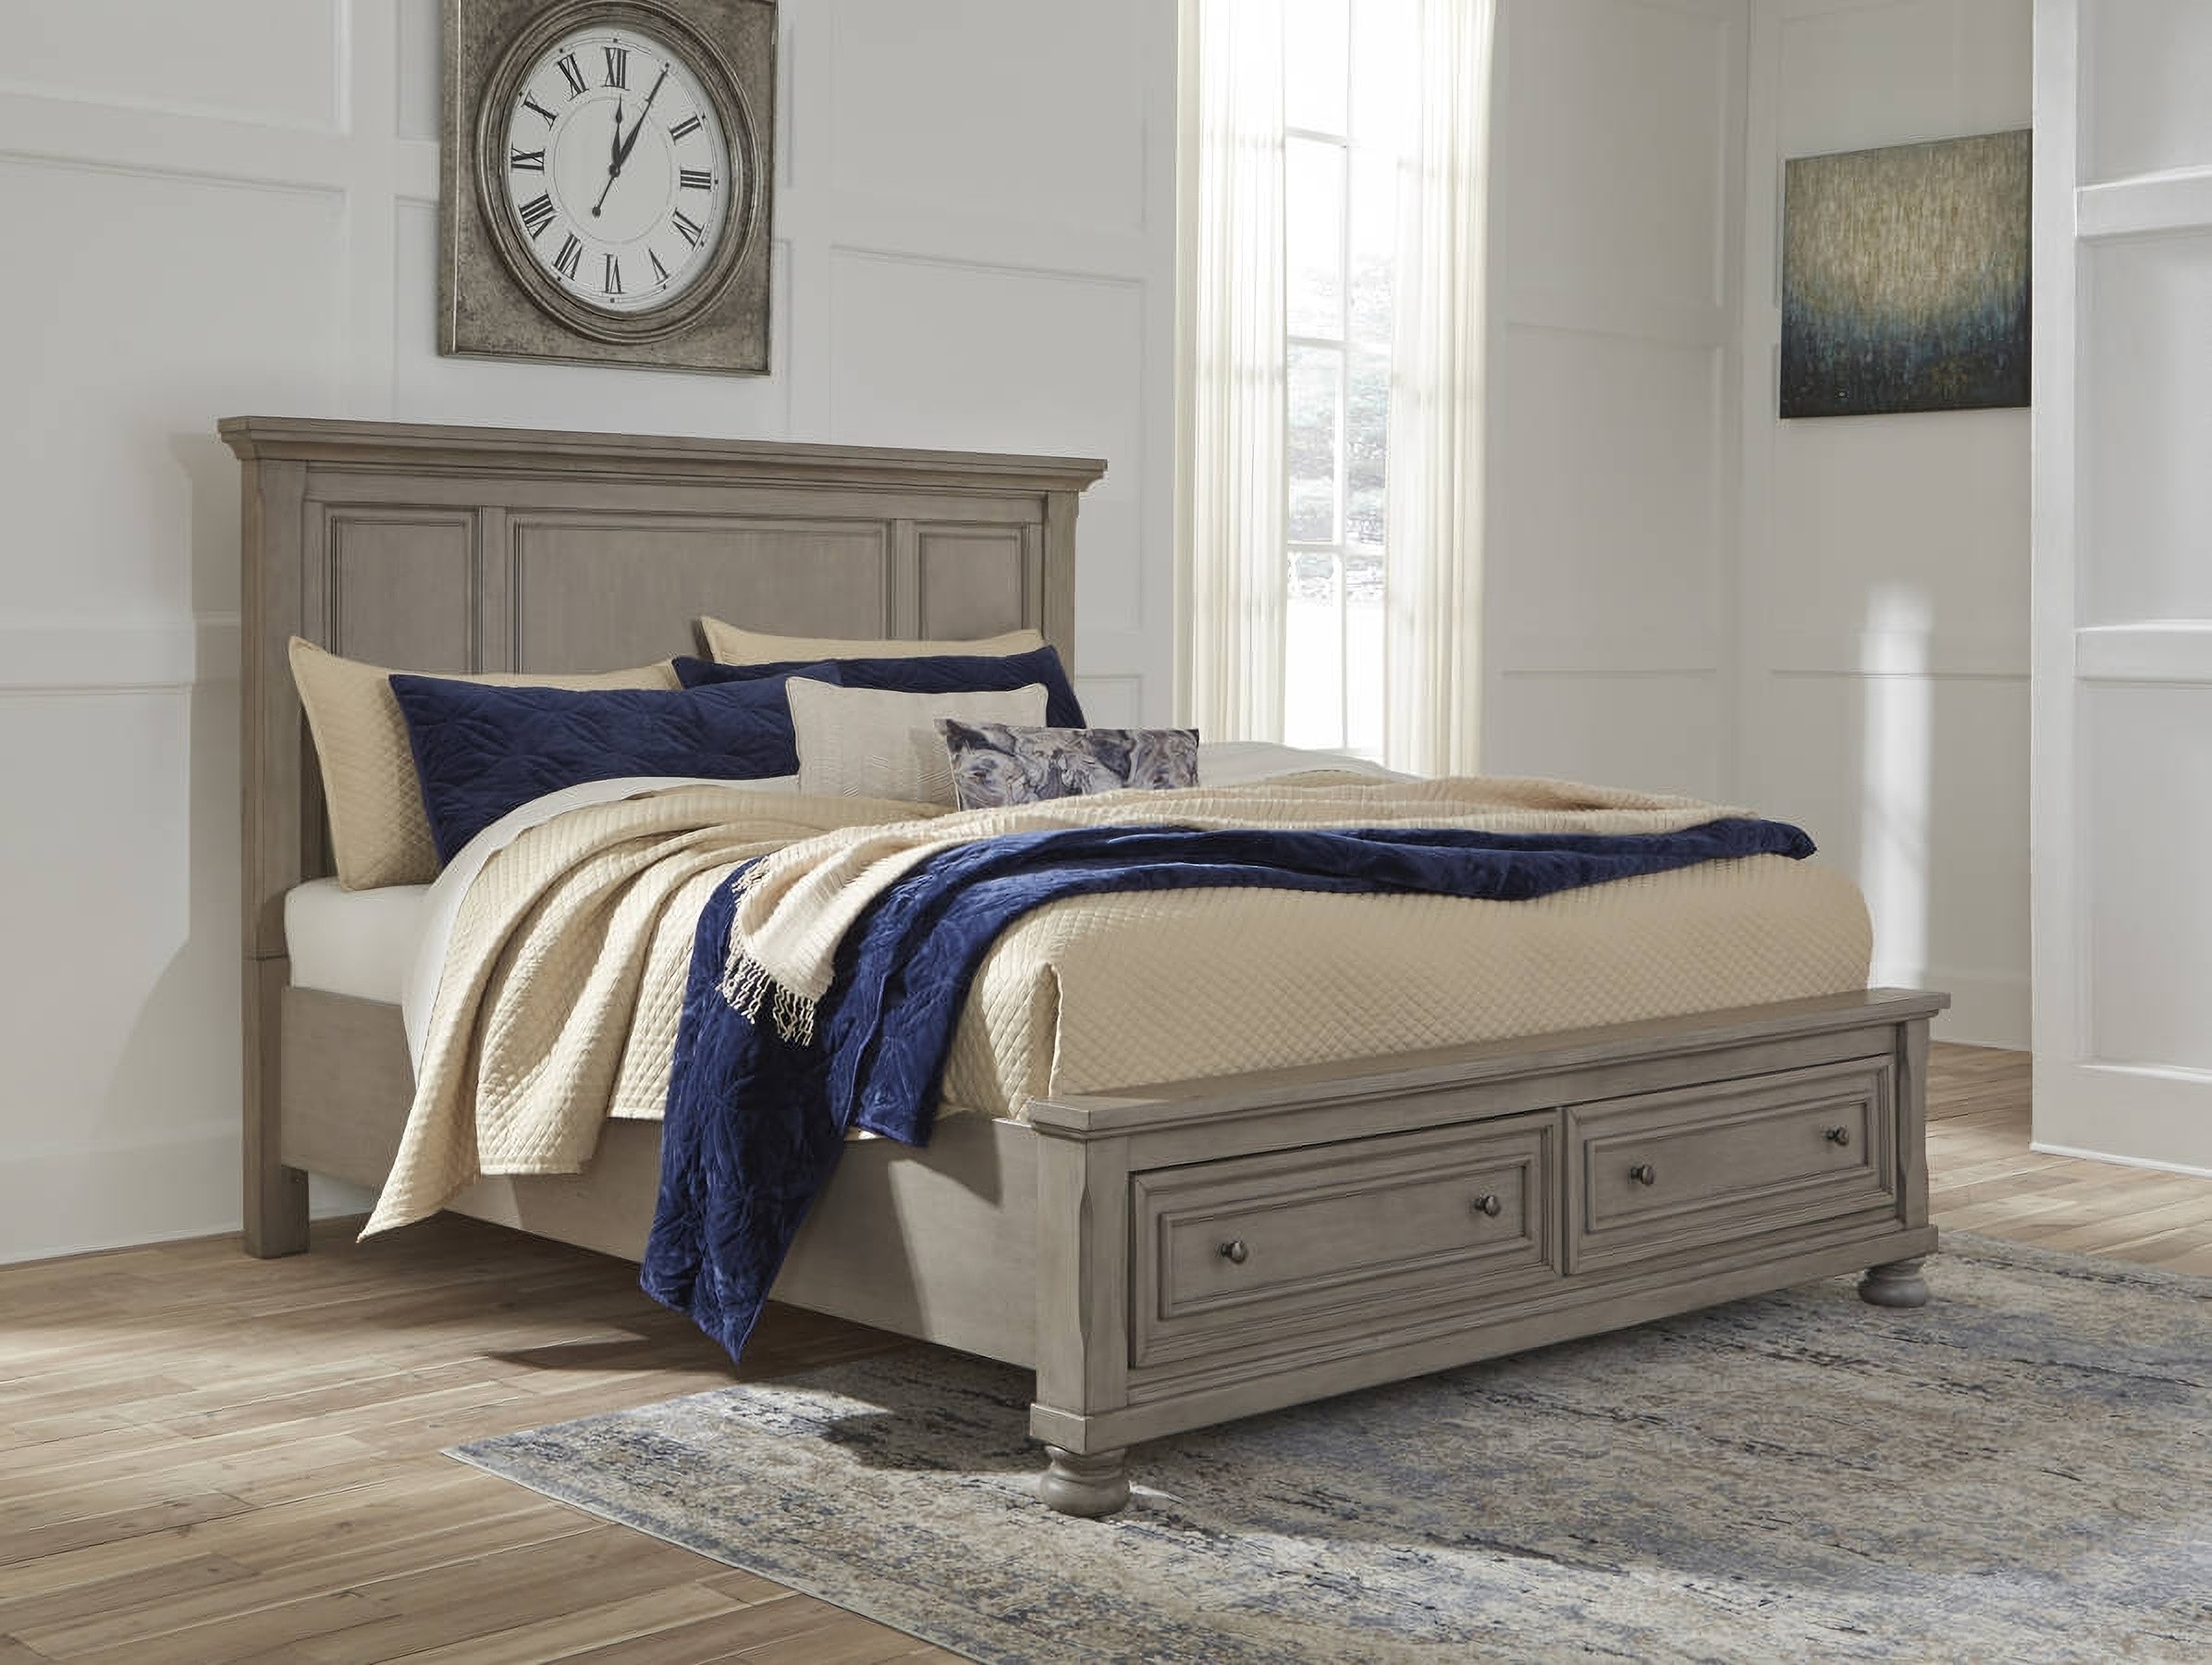 Ashley Furniture Lettner King Panel, Ashley Furniture King Bed With Drawers